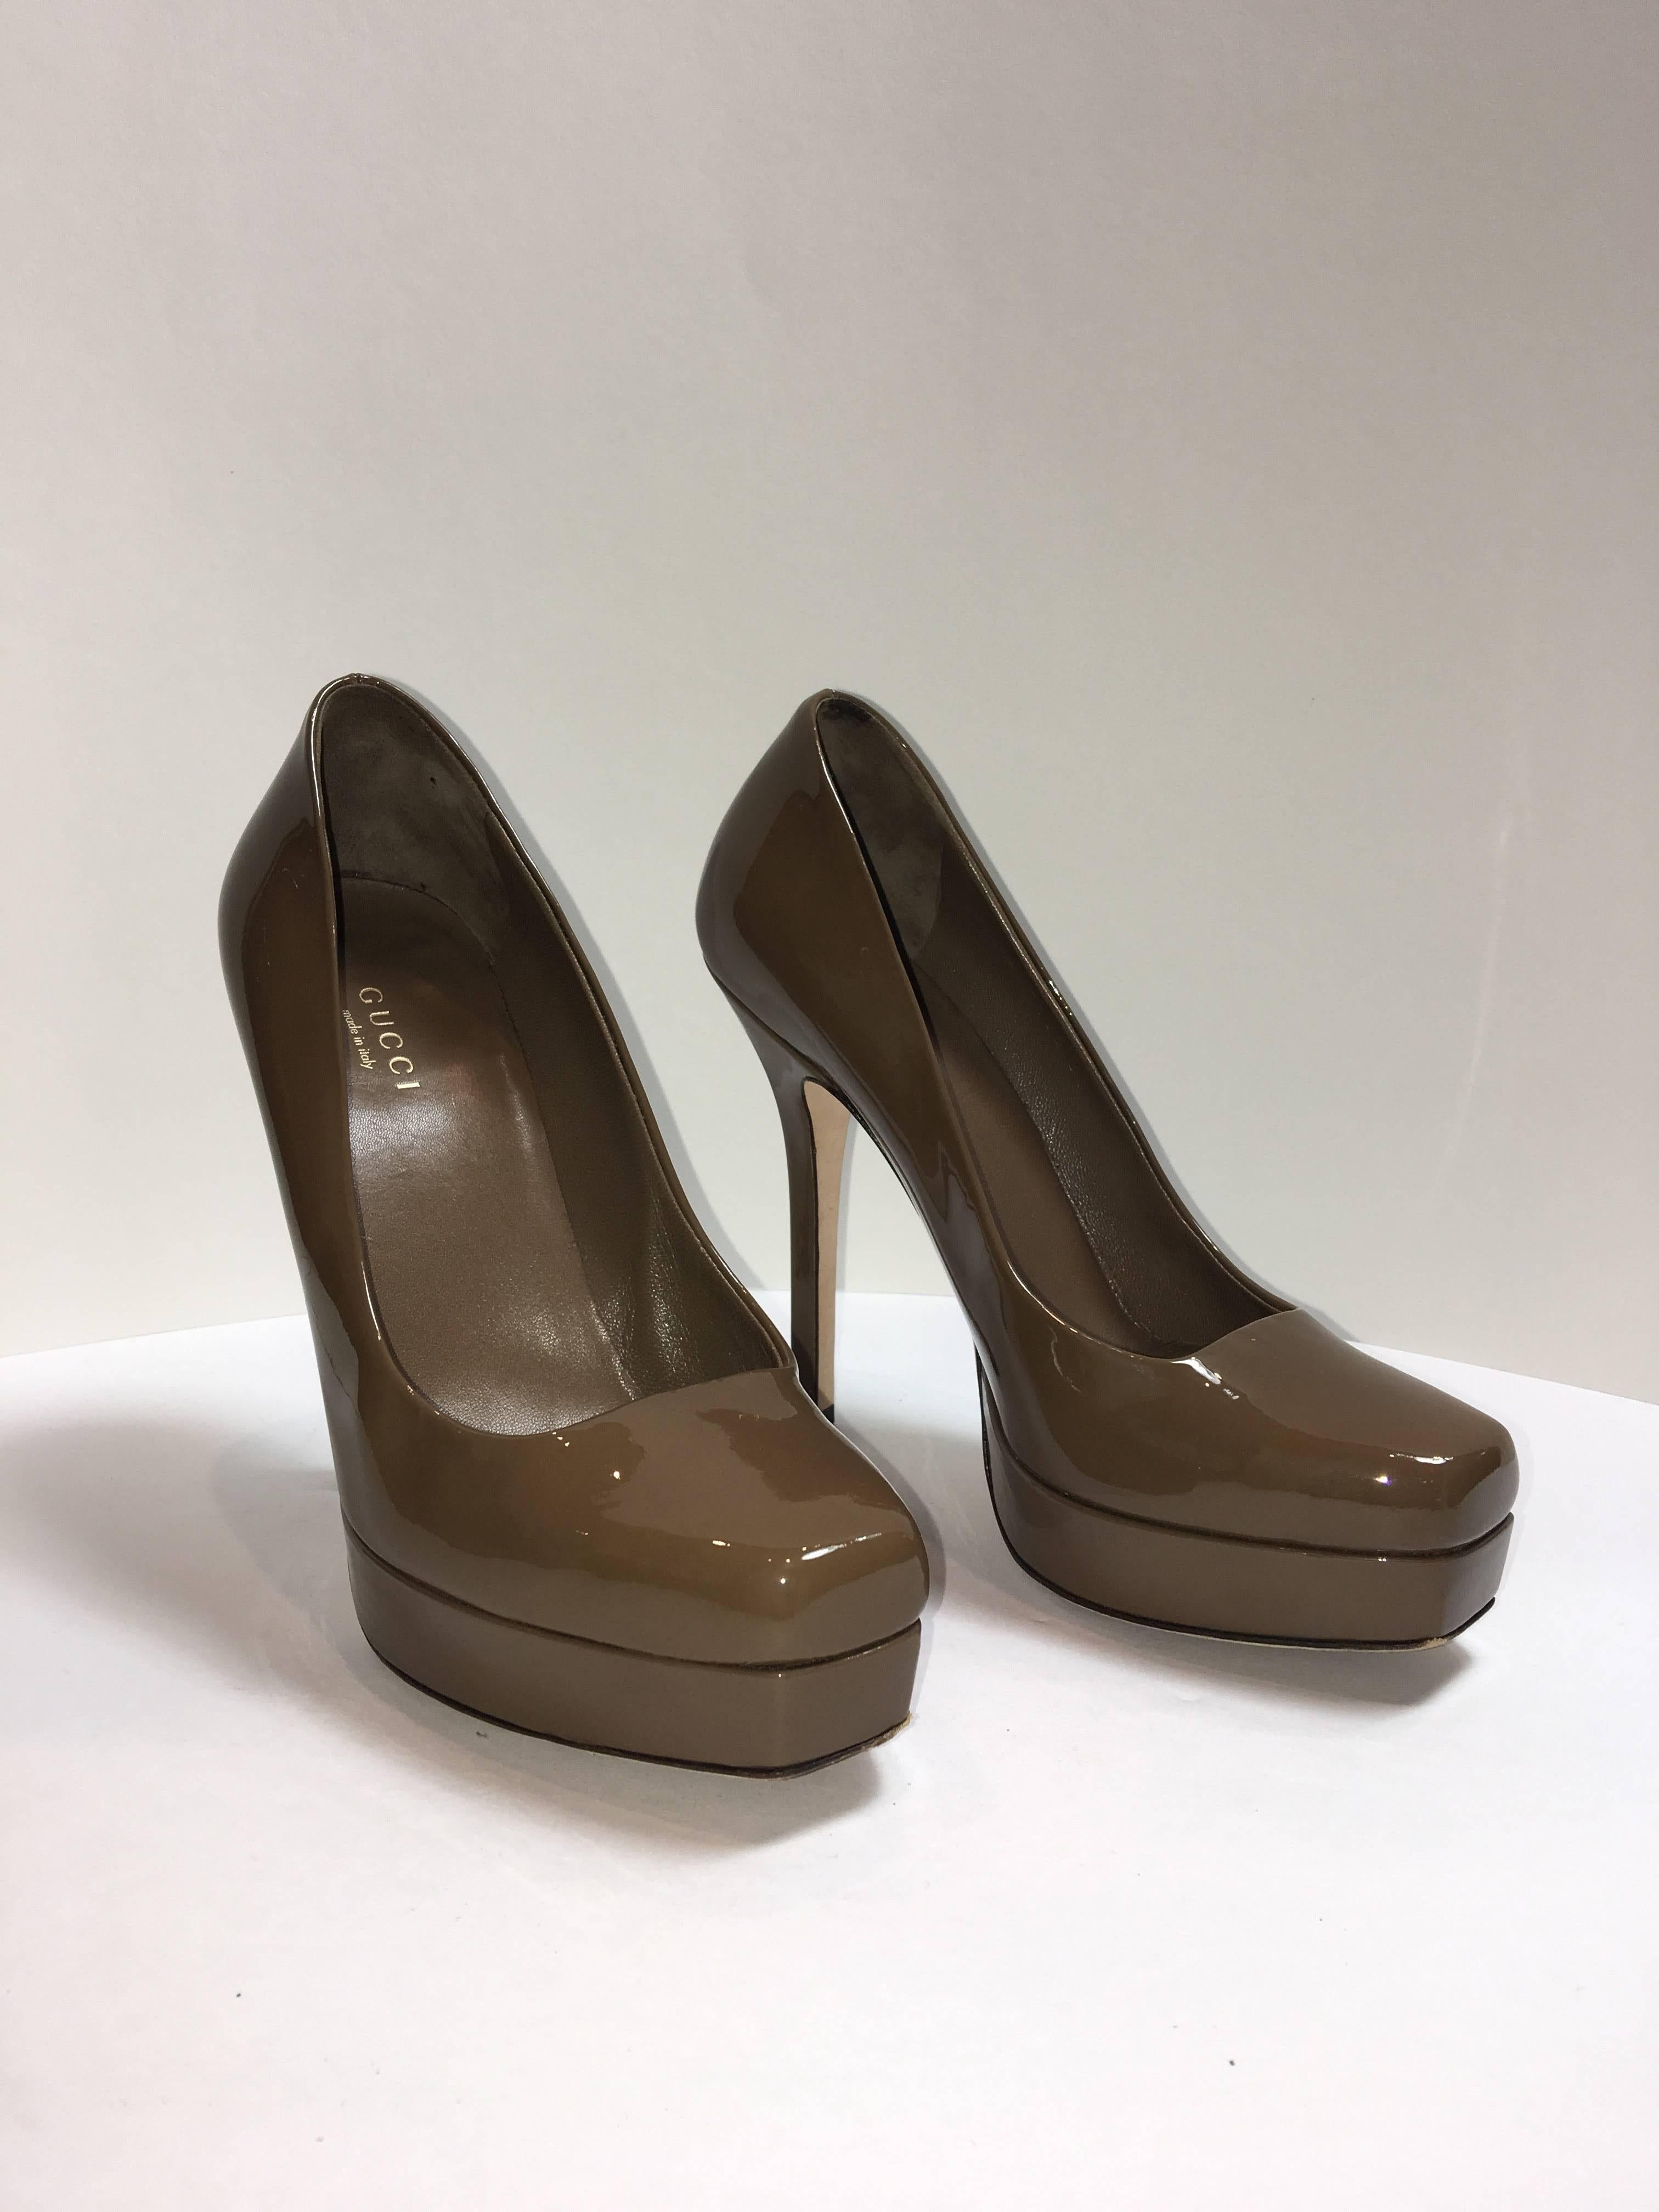 Gucci size 36 Pumps in taupe patent leather. Platform Heels with square toe. 